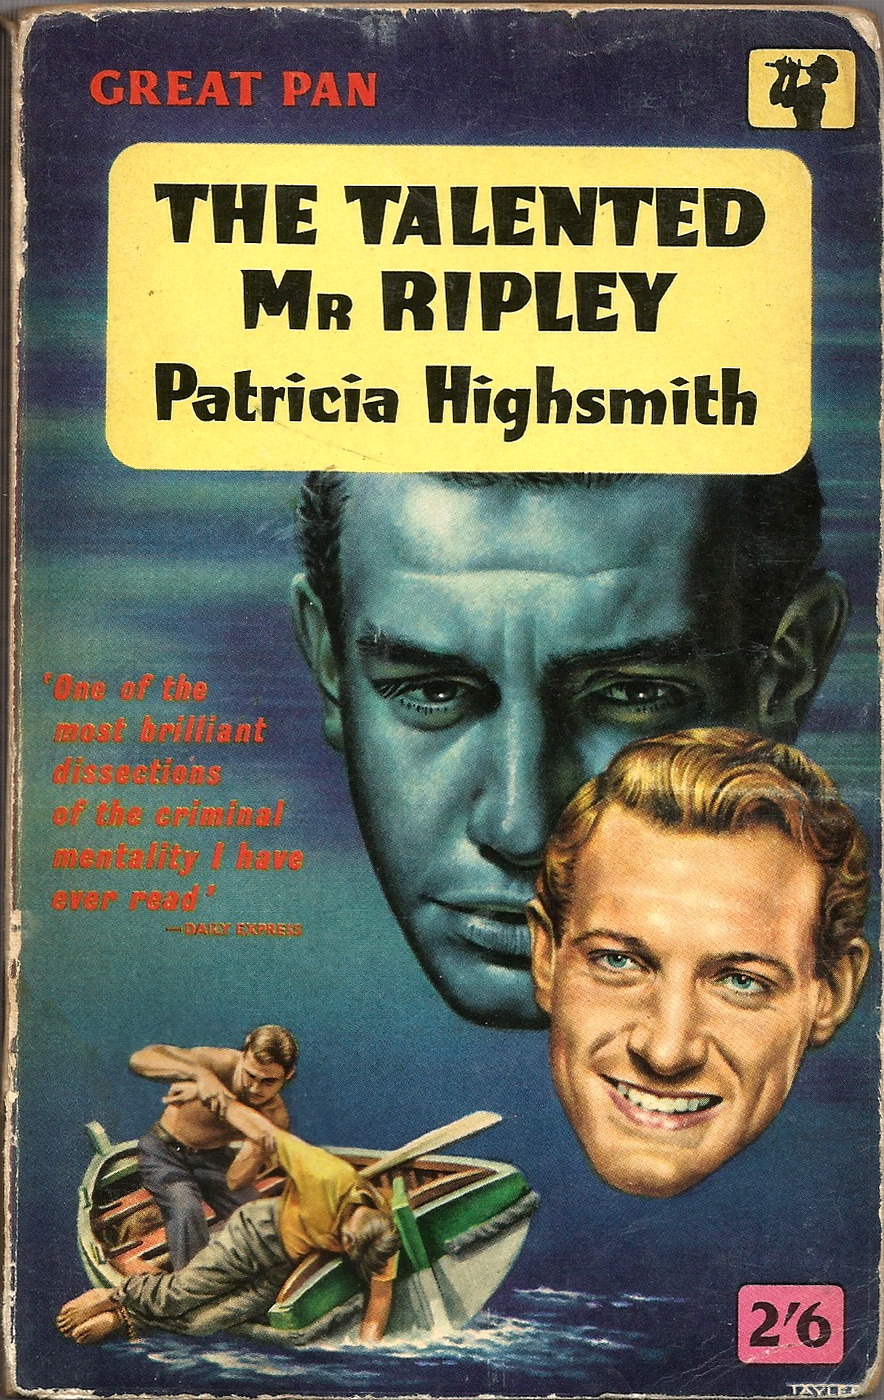 The Talented Mr. Ripley, by Patricia Highsmith (Pan, 1957) From a charity shop in